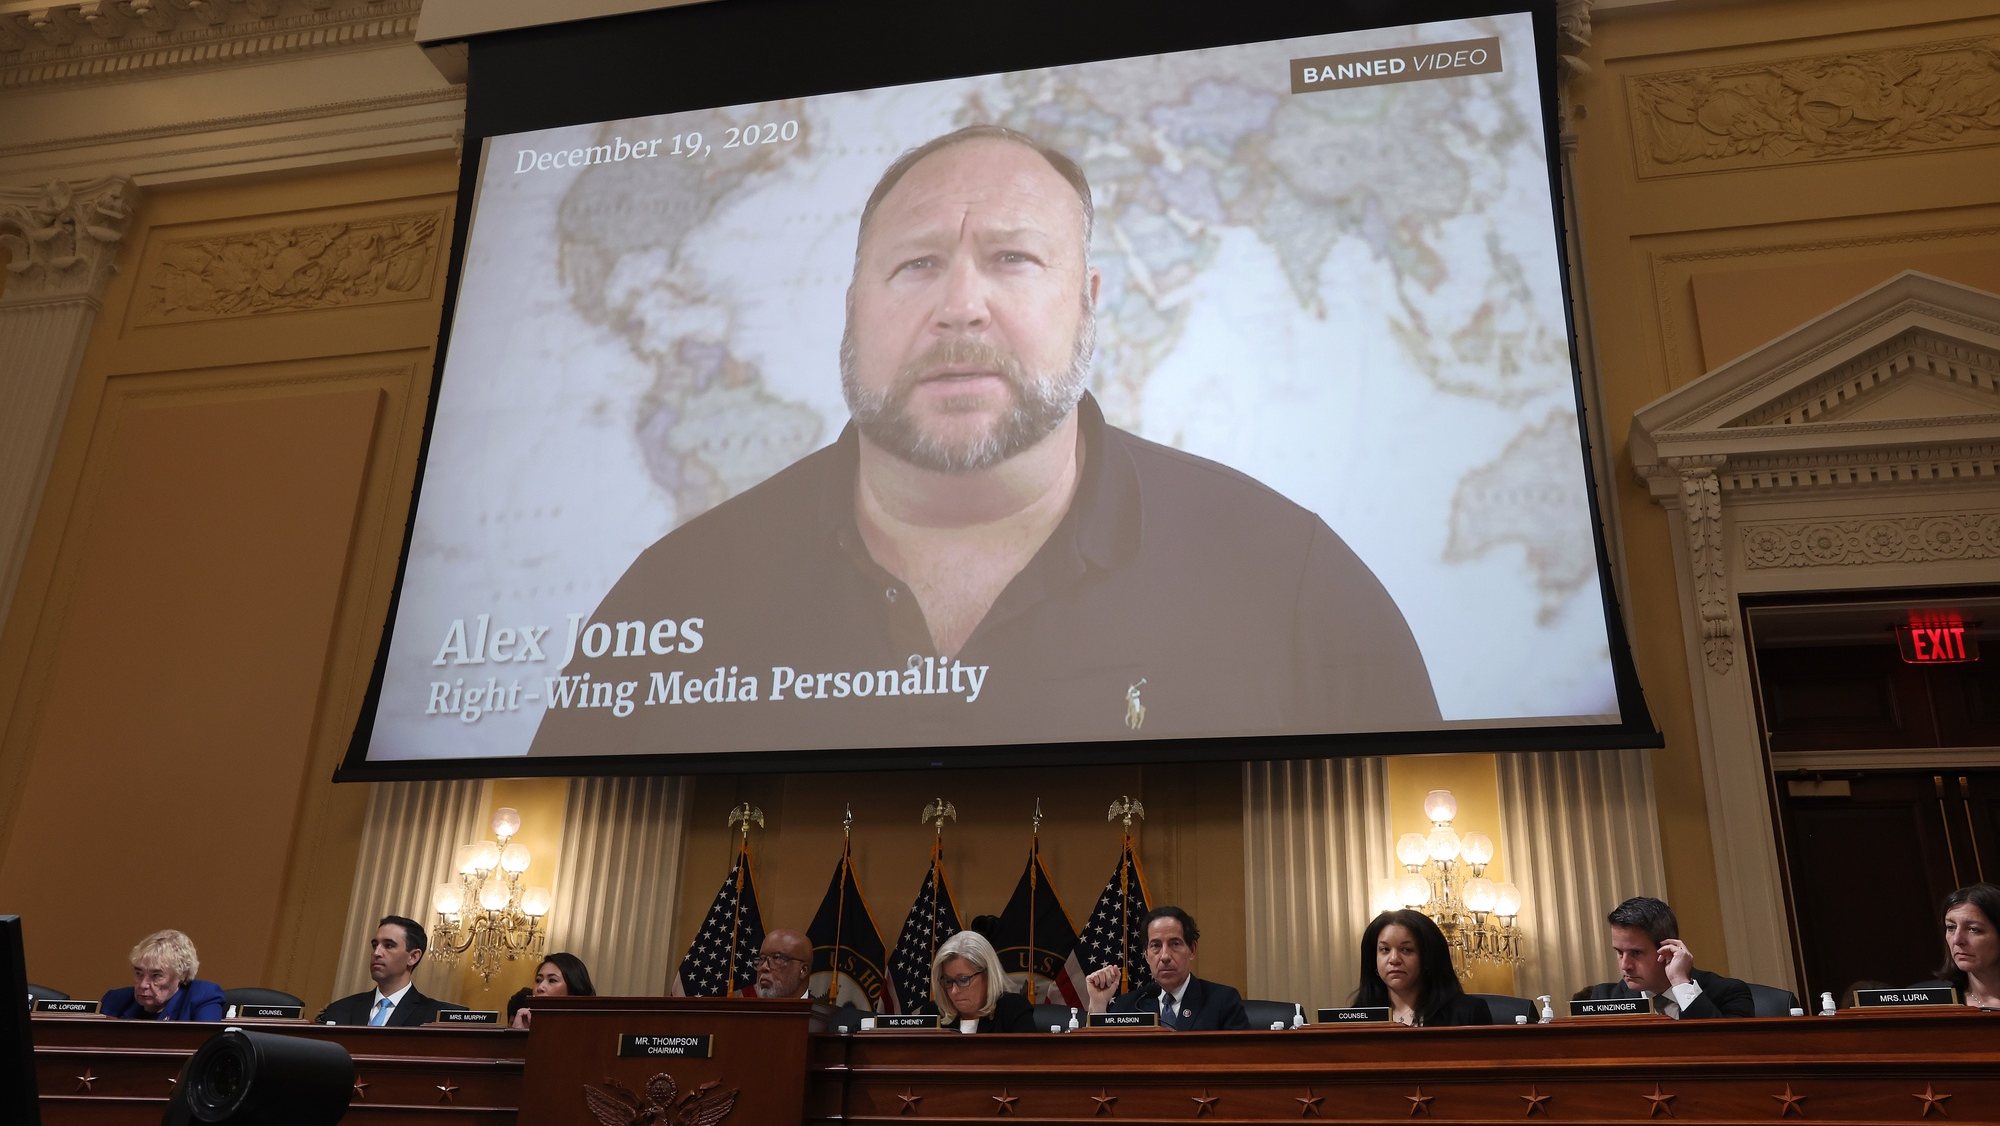 epa10067391 An image of conservative radio and social media personality Alex Jones reacting to a tweet by former US President Donald J. Trump citing election fraud and inviting people to the January 6 rally appears on a screen a public hearing of the House Select Committee to Investigate the January 6th Attack on the US Capitol, on Capitol Hill in Washington, DC, USA, 12 July 2022. The committee is expected to hold at least eight public hearings.  EPA/MICHAEL REYNOLDS